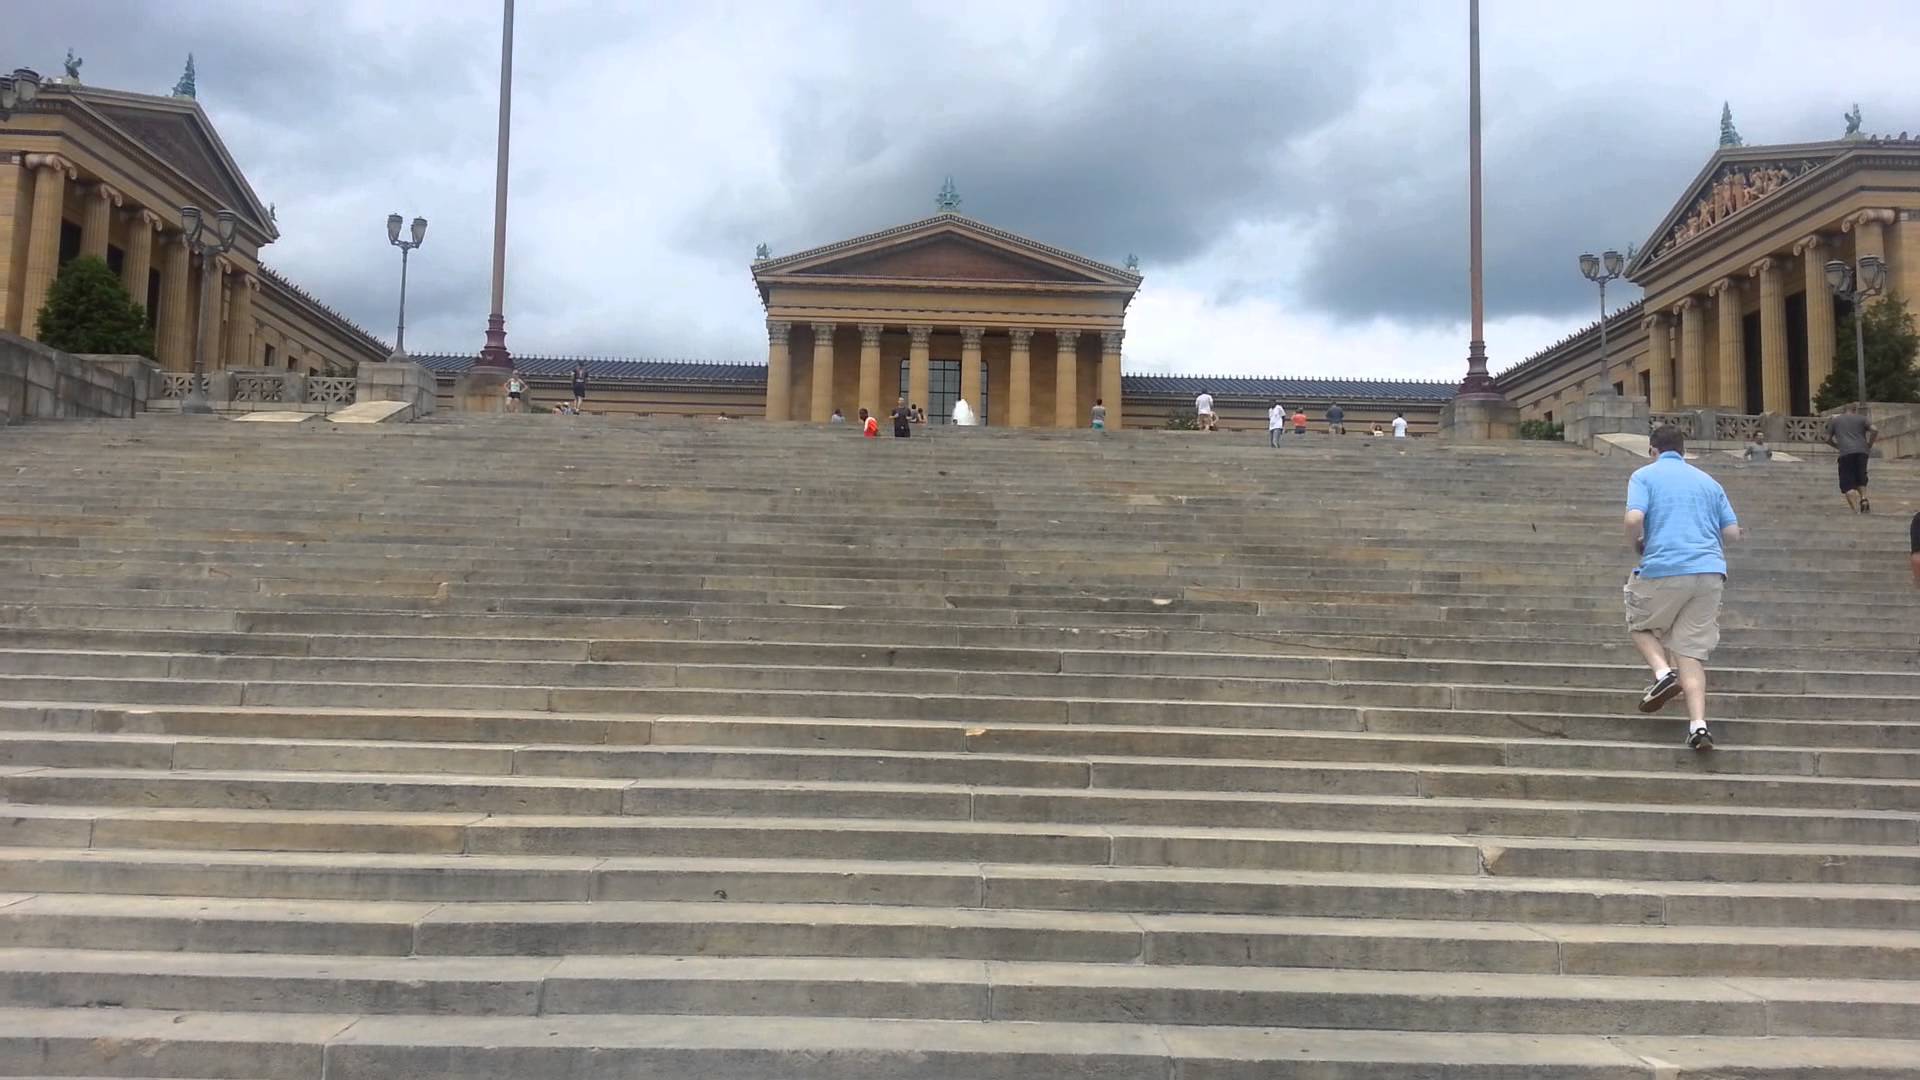 The rocky steps in philly - YouTube